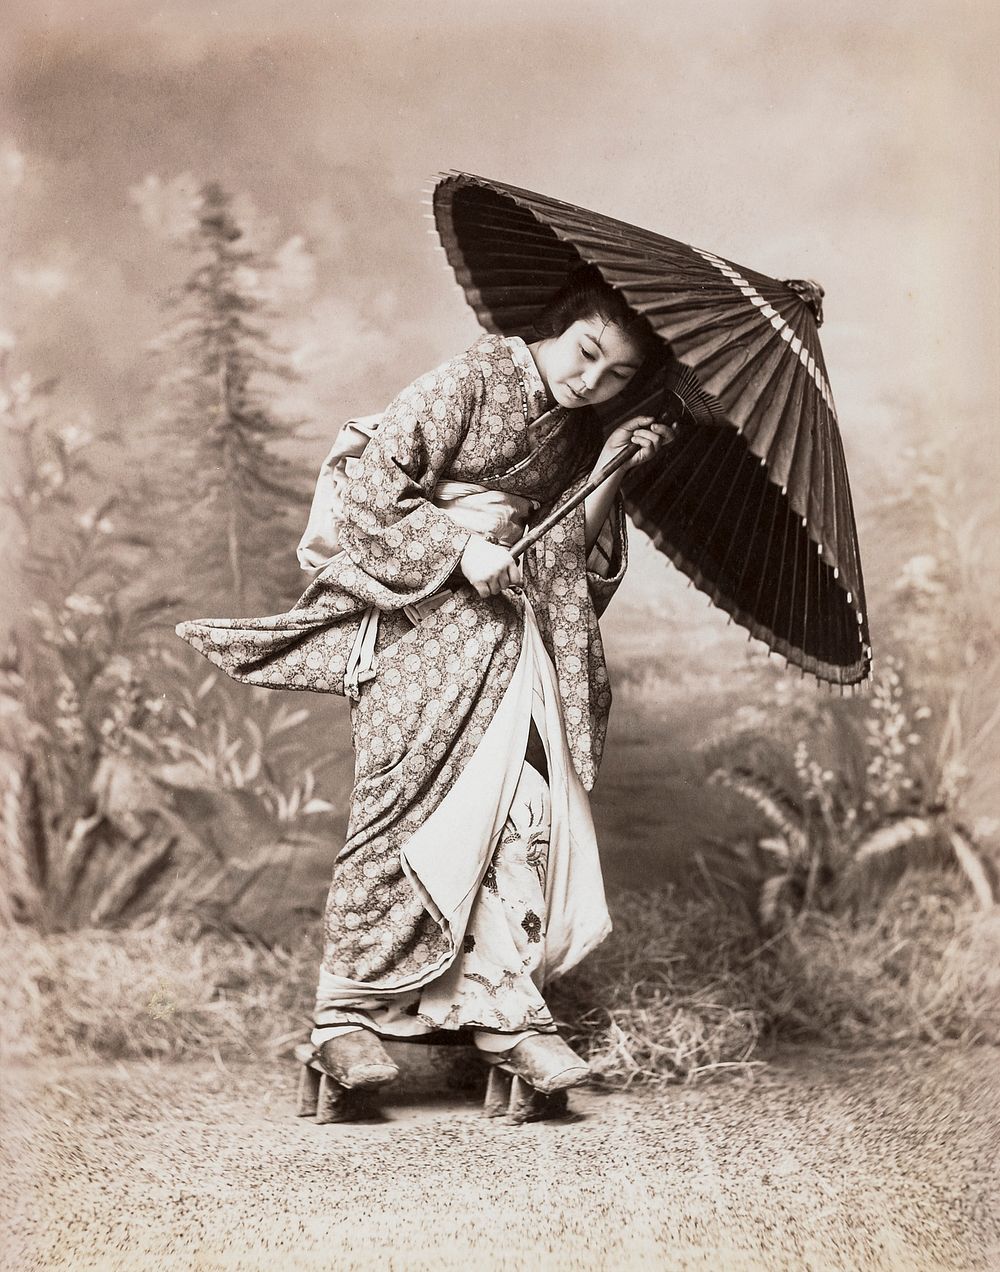 Japanese woman and a parasol (19th-20th century) vintage photography by Keisai Eisen. Original public domain image from The…